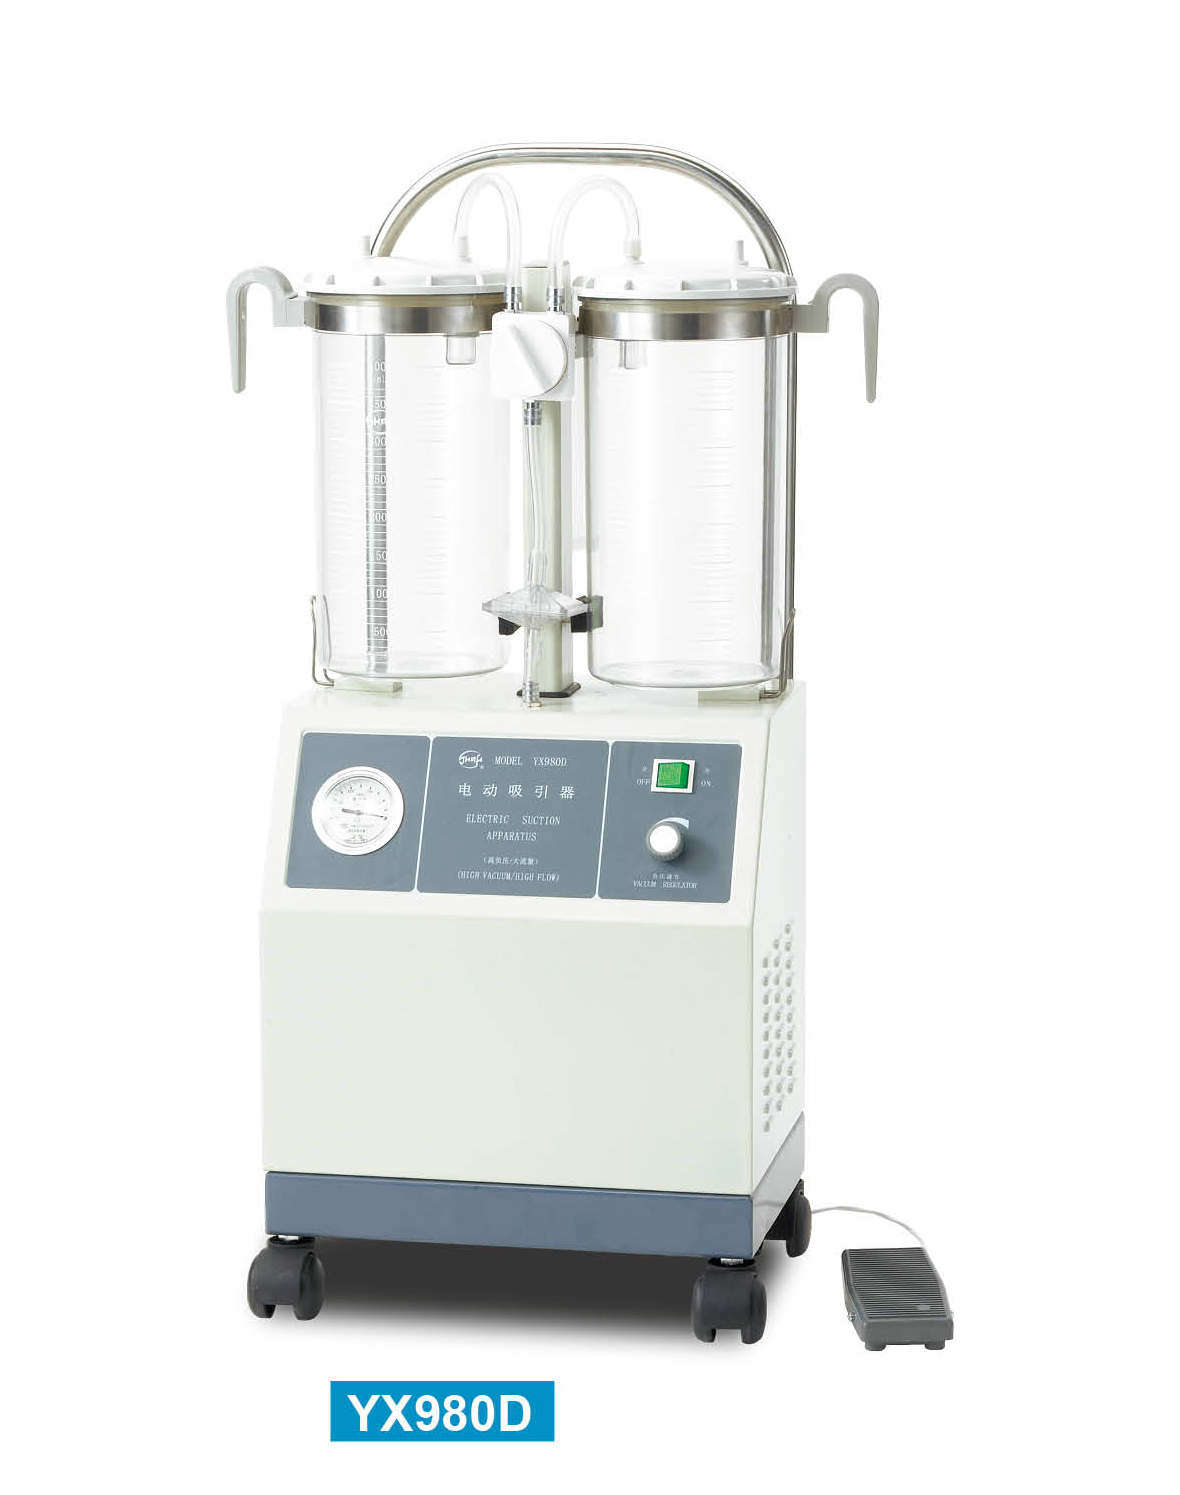 Medical Equipment Electric Suction Apparatus Model Yx980d